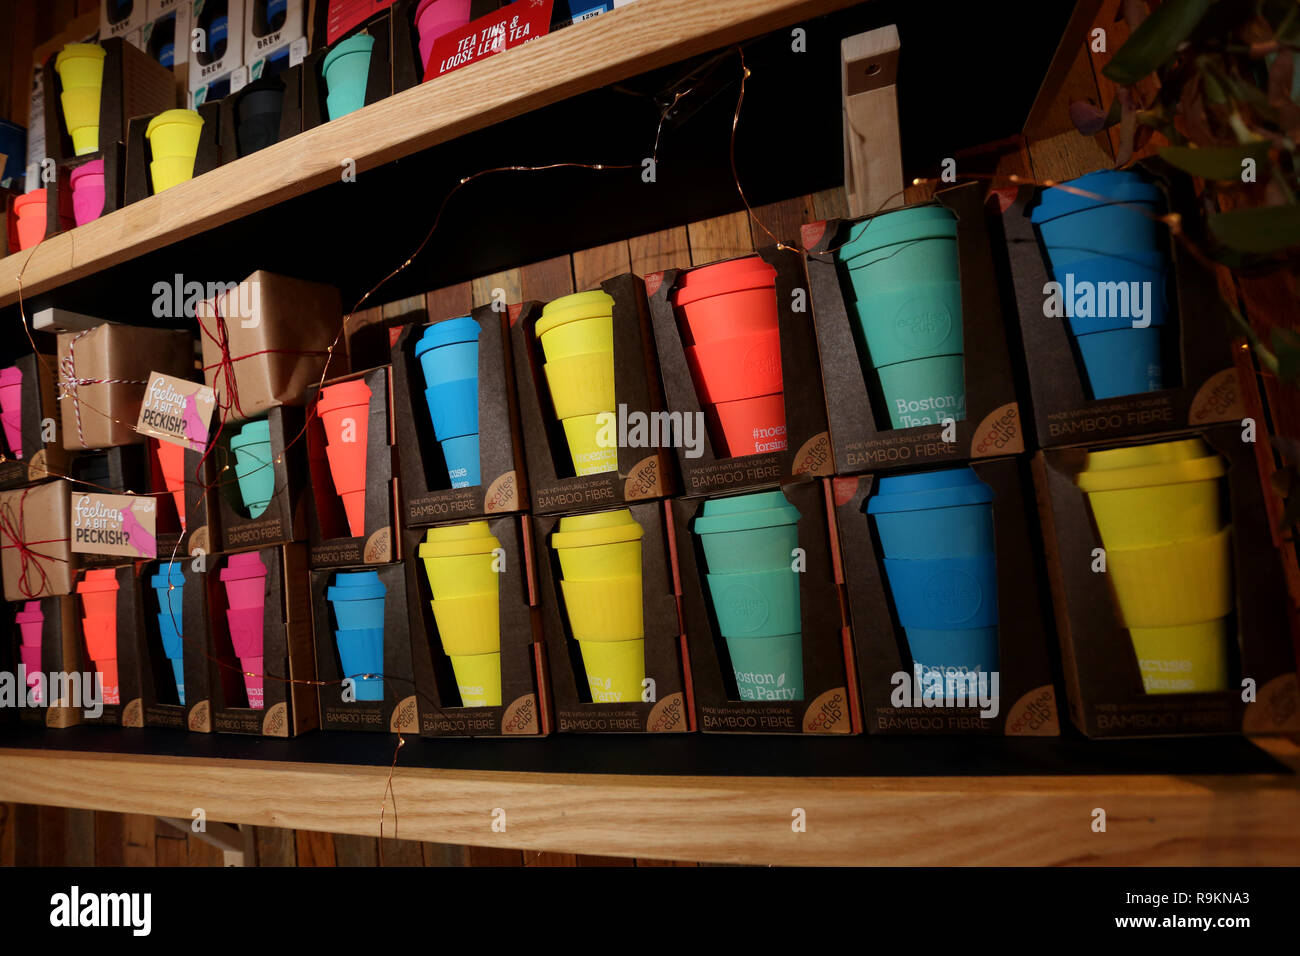 General view of recycled coffee cups for sale at Boston Tea Party Restaurant in Chichester, West Sussex, UK. Stock Photo